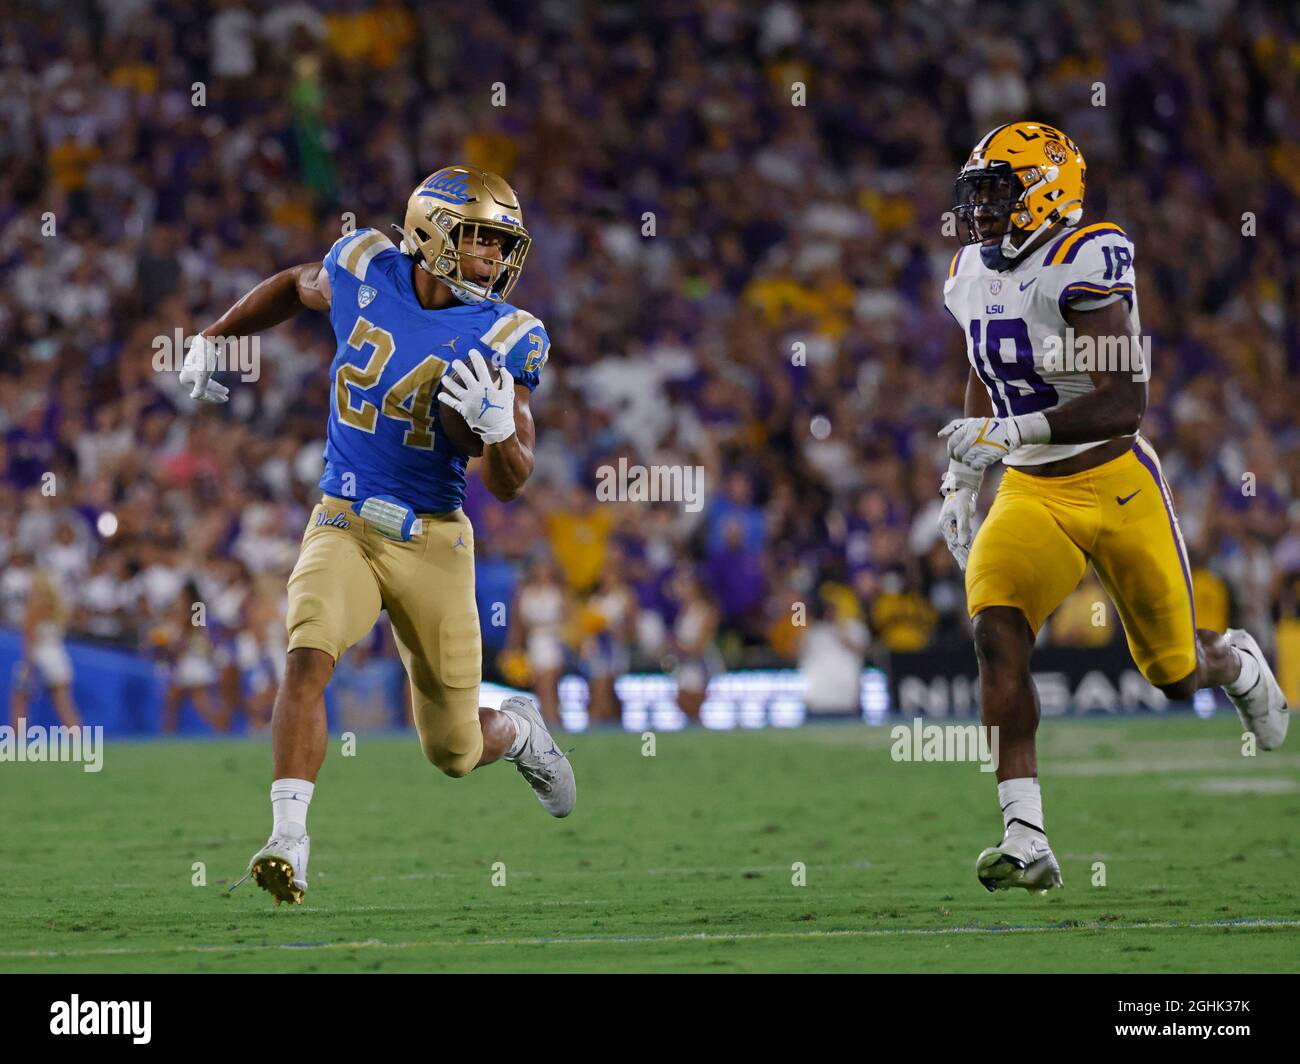 Pasadena, California, USA. 04th Sep, 2021. UCLA Bruins running back Zach Charbonnet #24 carries the ball as LSU Tigers linebacker Damone Clark #18 defends during the NCAA football game between the UCLA Bruins and the LSU Tigers at the Rose Bowl in Pasadena, California. Mandatory Photo Credit : Charles Baus/CSM/Alamy Live News Stock Photo